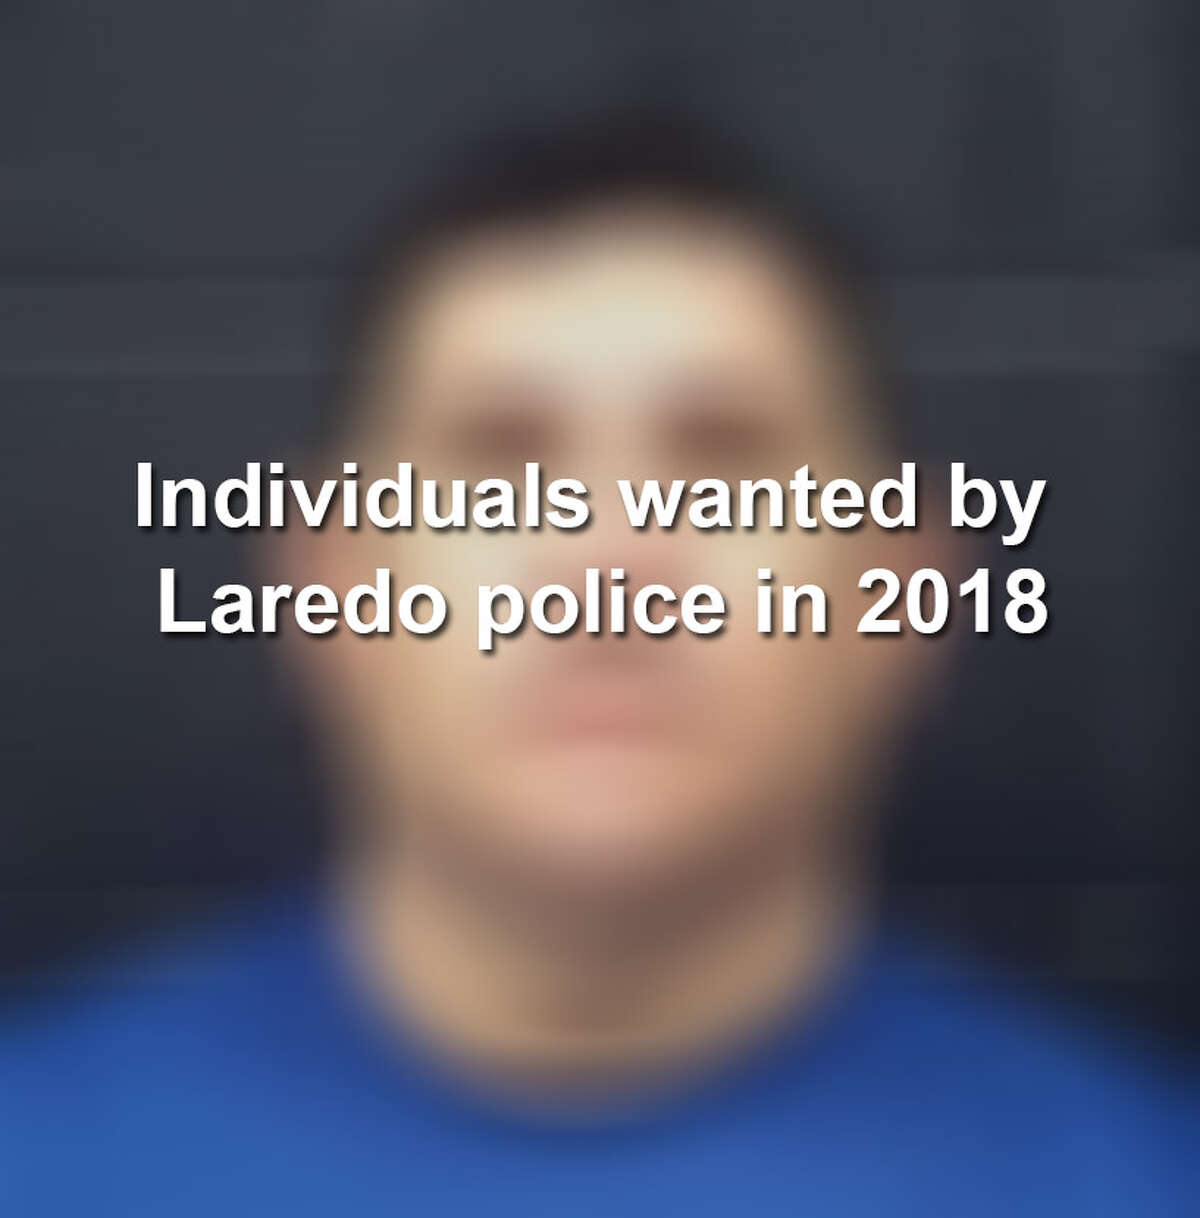 Keep scrolling to see individuals who have been or are still wanted by the Laredo Police Department this year.